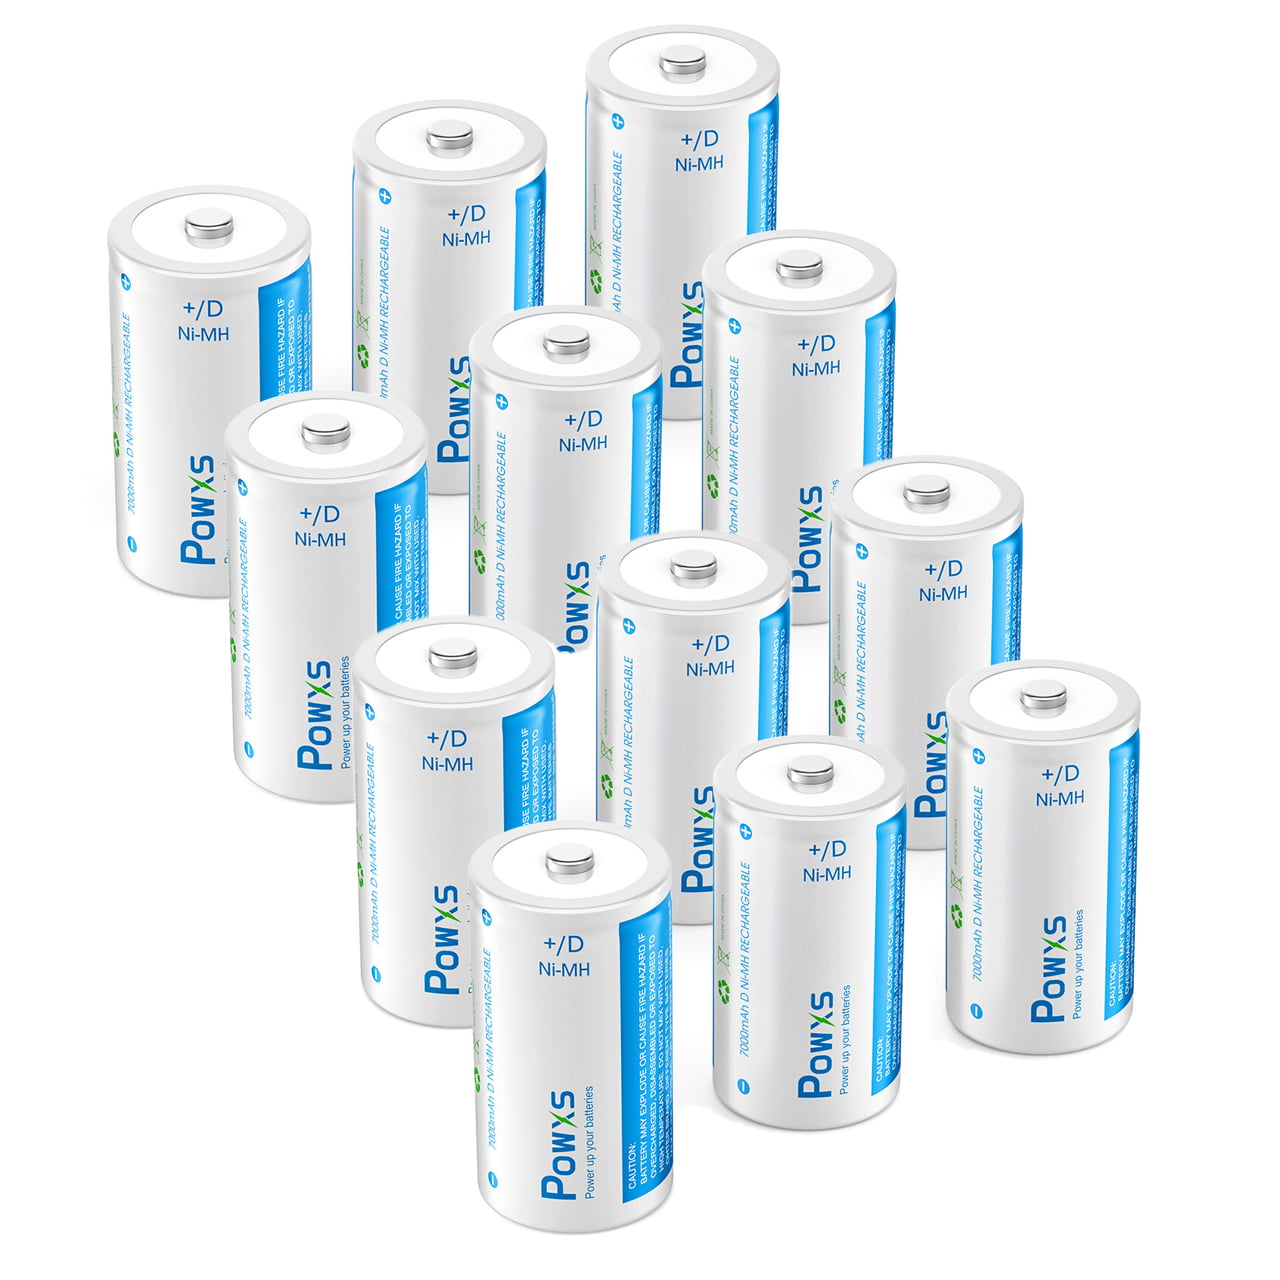 POWXS Rechargeable D Cells Batteries, 12 Pack 7000mAh 1.2V Ni-MH High  Capacity Standard D Size Battery 